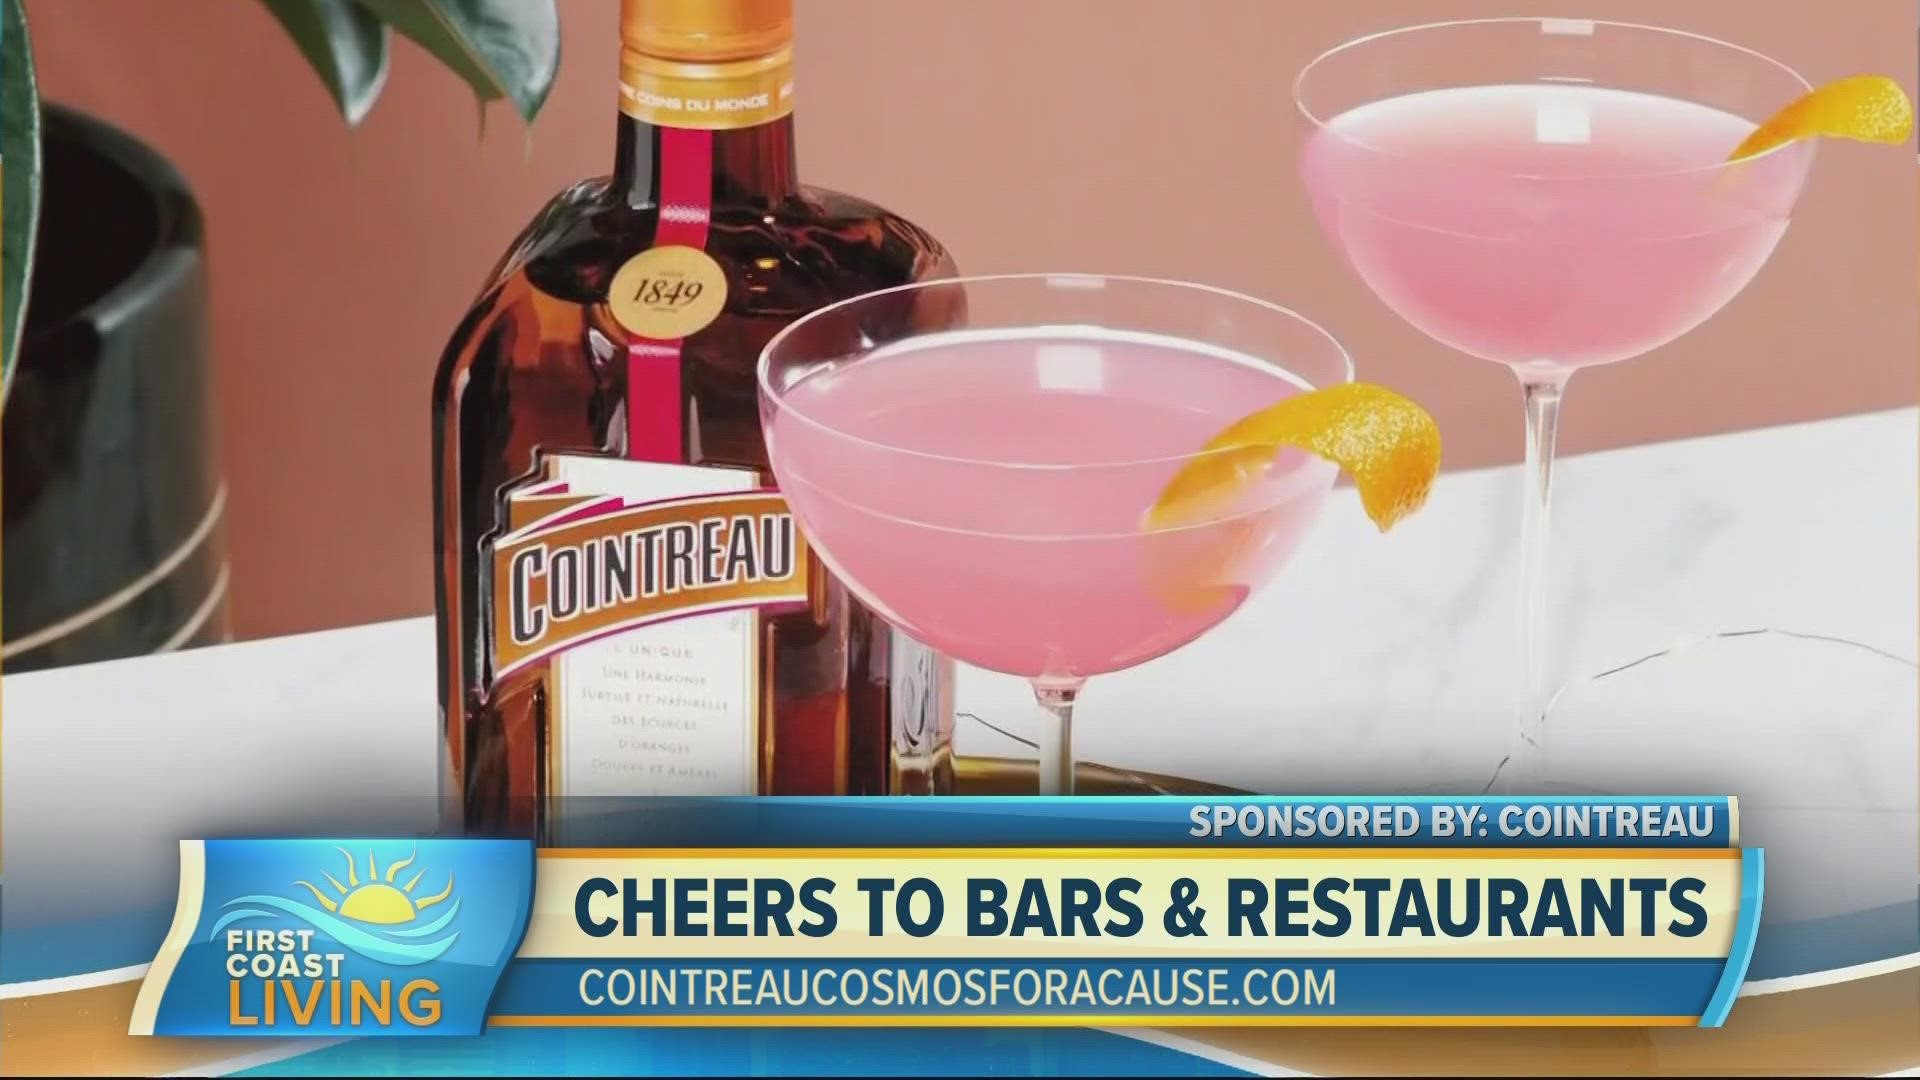 Remy Cointreau Brand Ambassador, Dominic Alling discusses why it's important to support our local bars and restaurants.